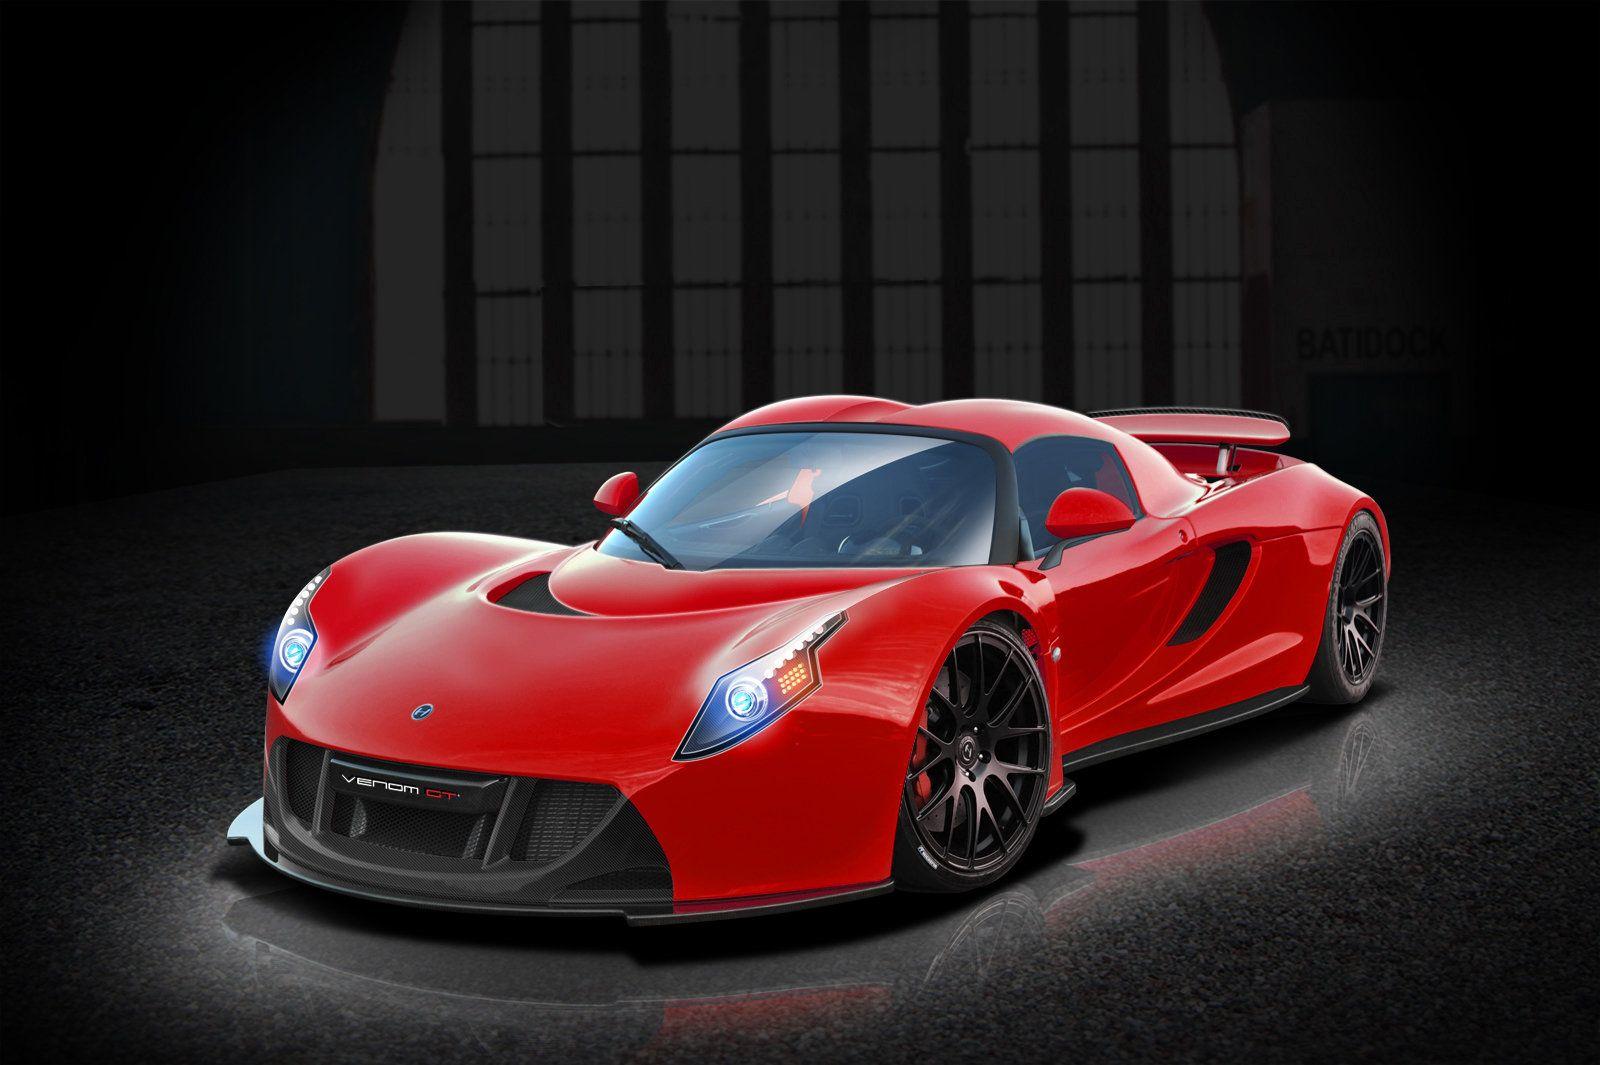 Hennessey Performance Car Logo - Hennessey Venom Reviews, Specs, Prices, Photos And Videos | Top Speed